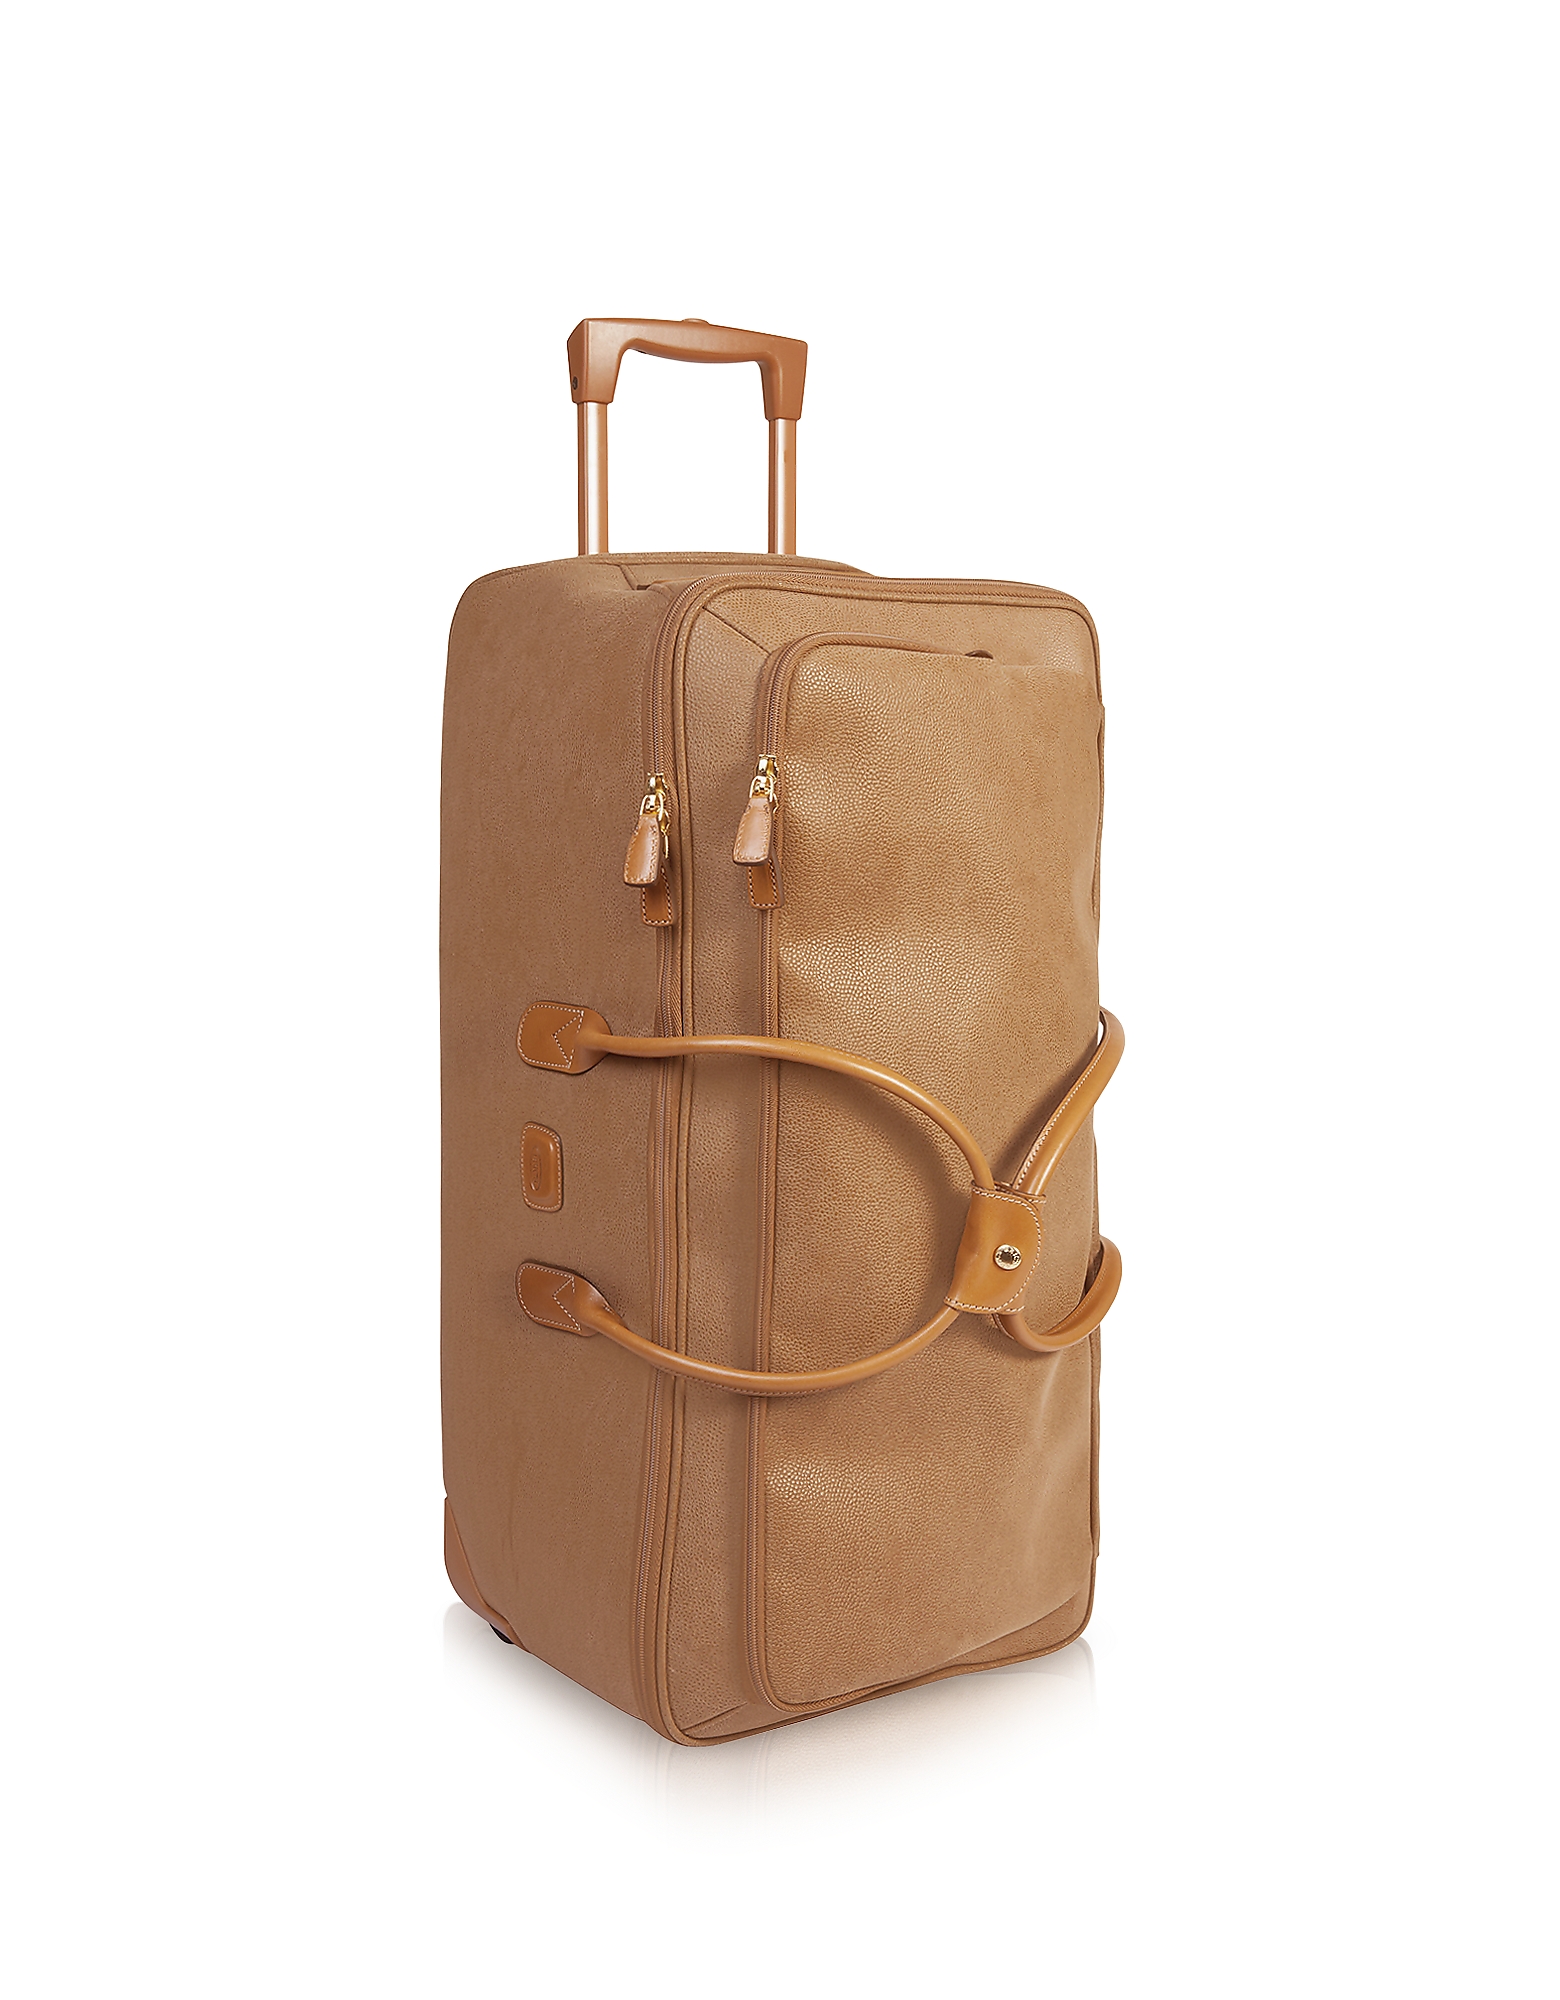 Bric's Designer Travel Bags, Life - Large Camel Micro Suede Rolling Duffle Bag